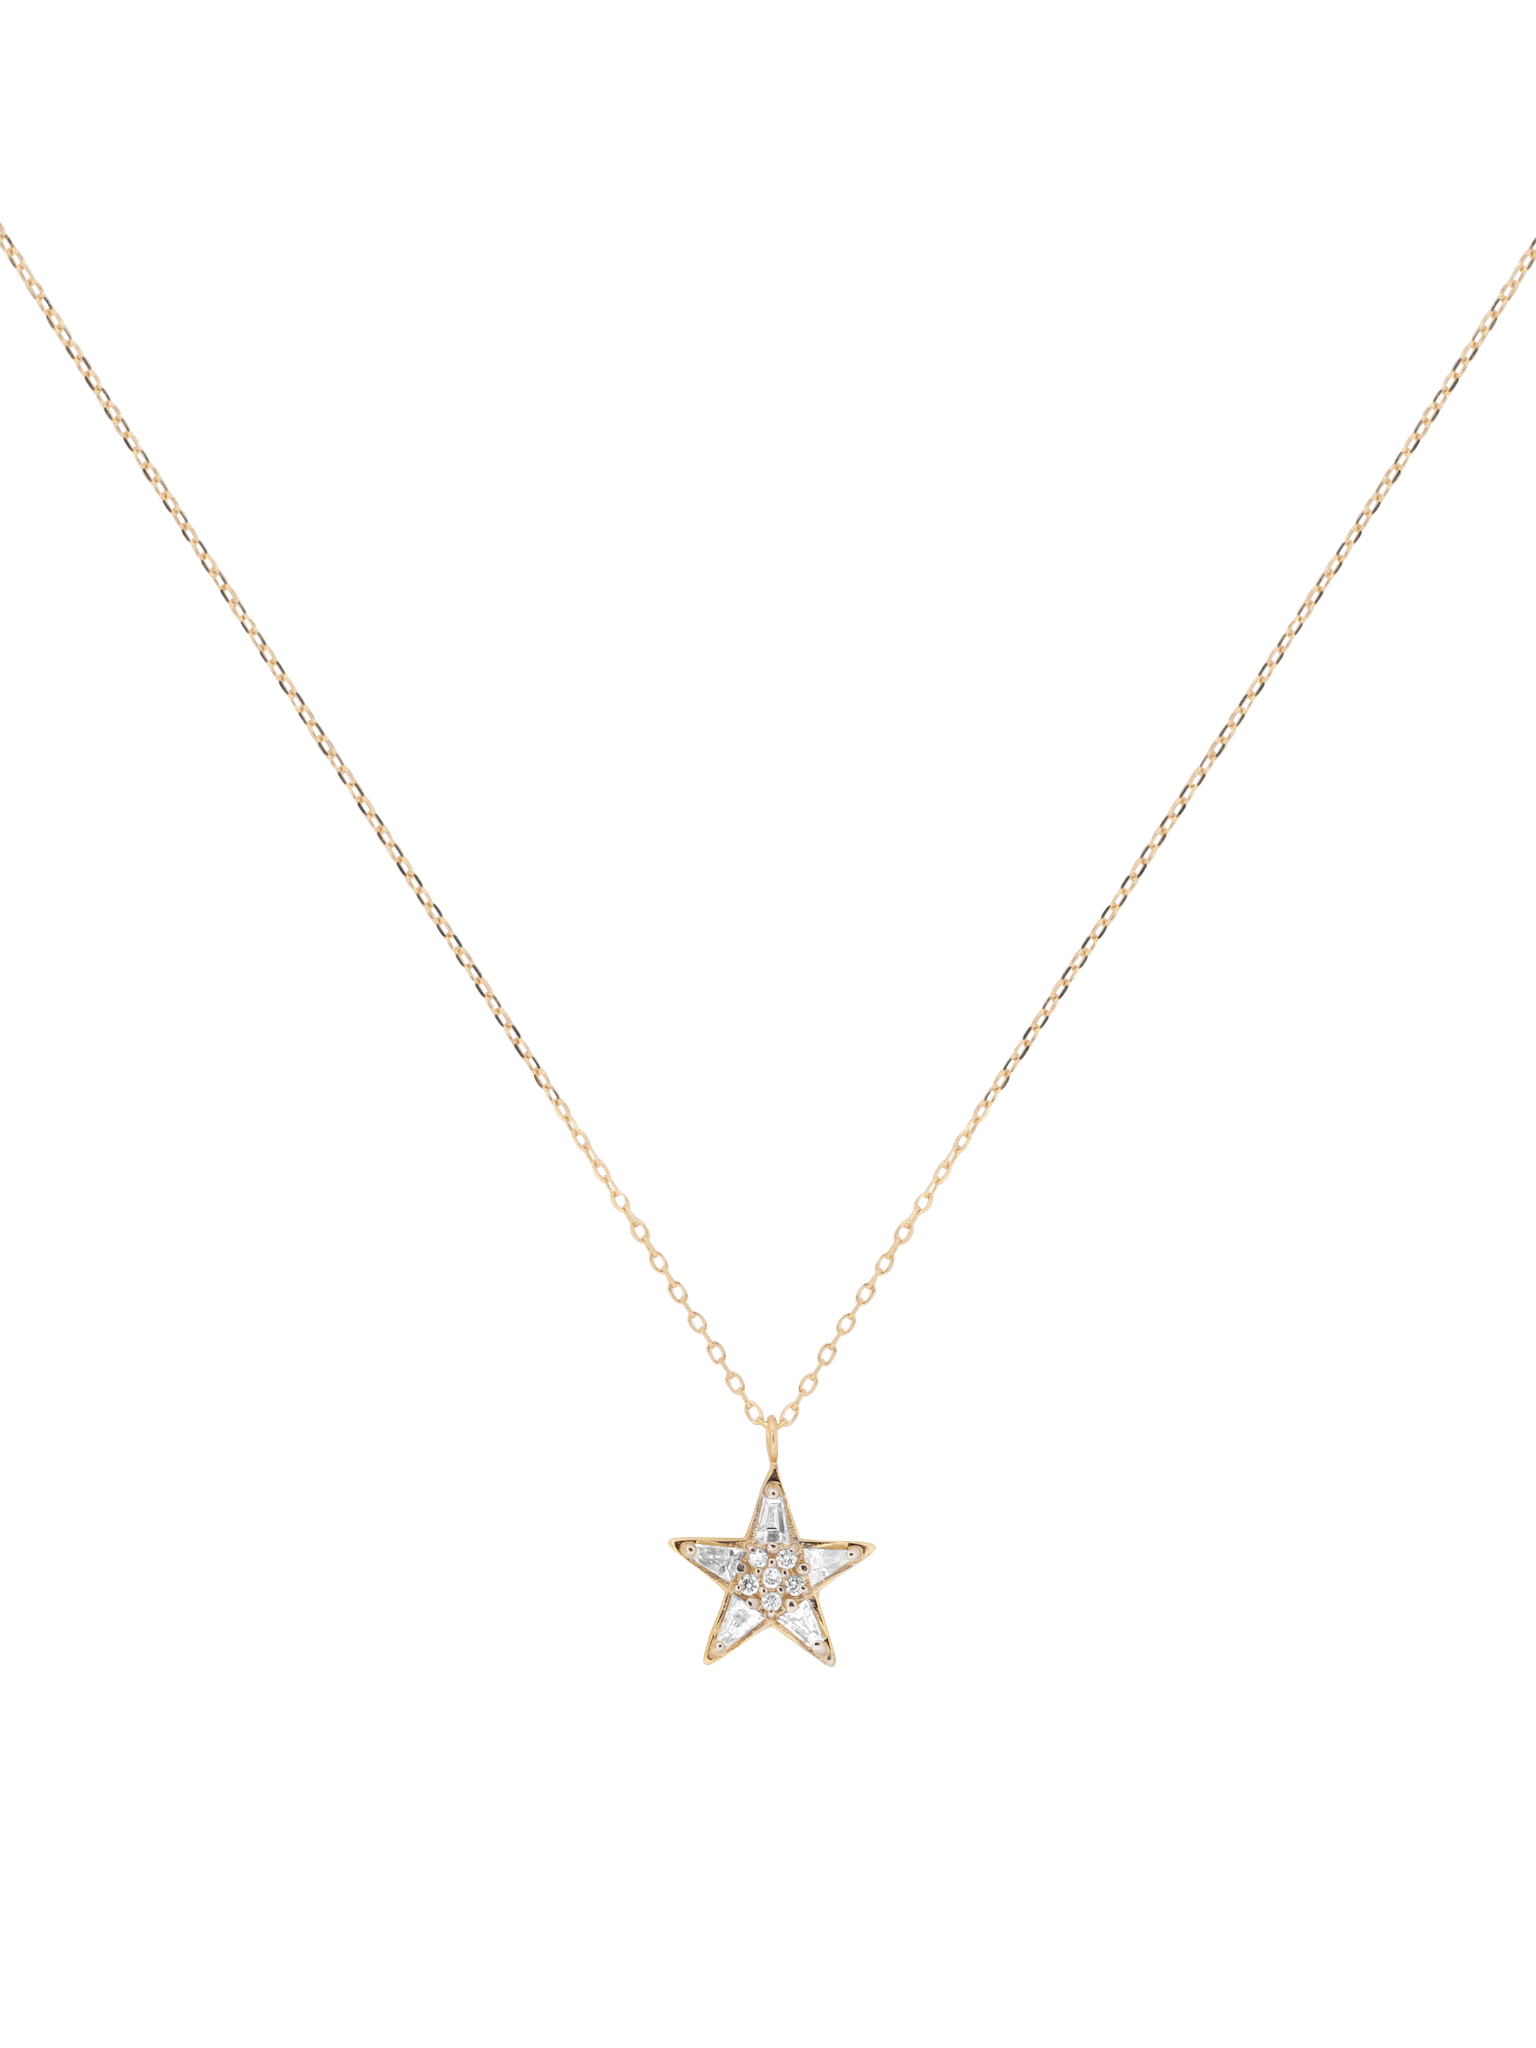 Point star pendant necklace photo 1